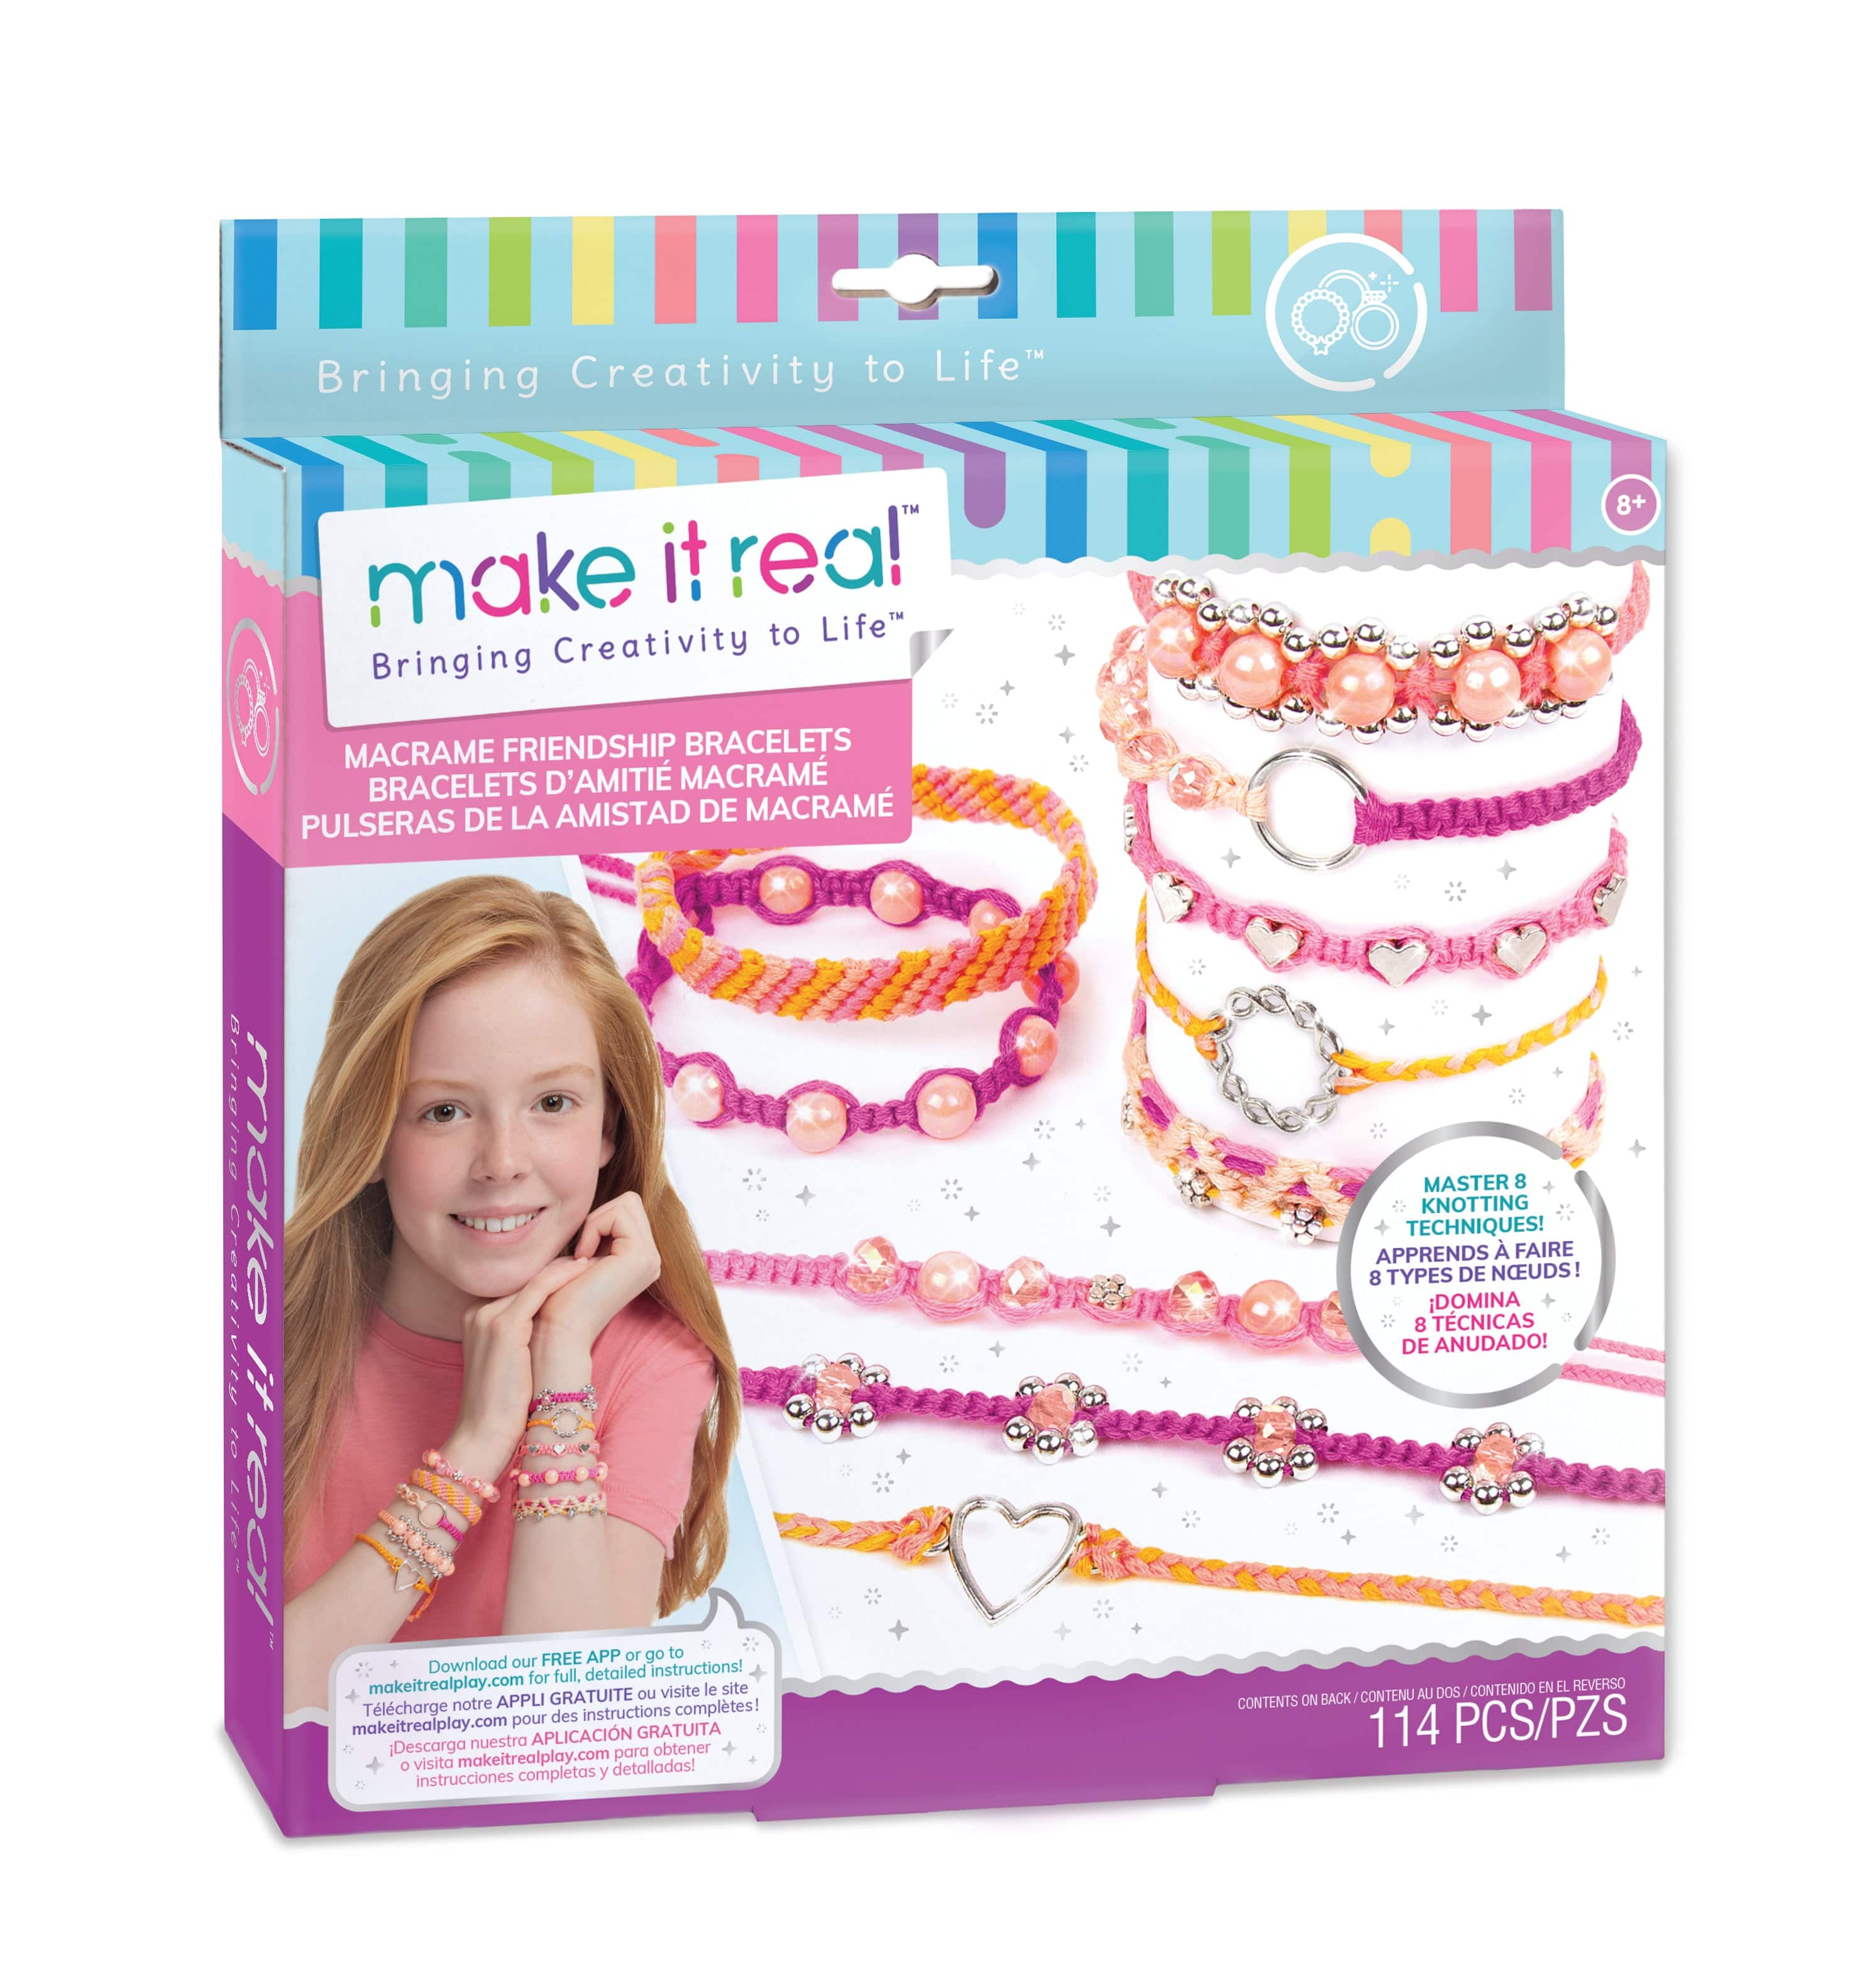 MACRAME FRIENDSHIP BRACELETS Kit - Jewelry Craft Kit for Tweens 8 Years & Up - Discovery Toys